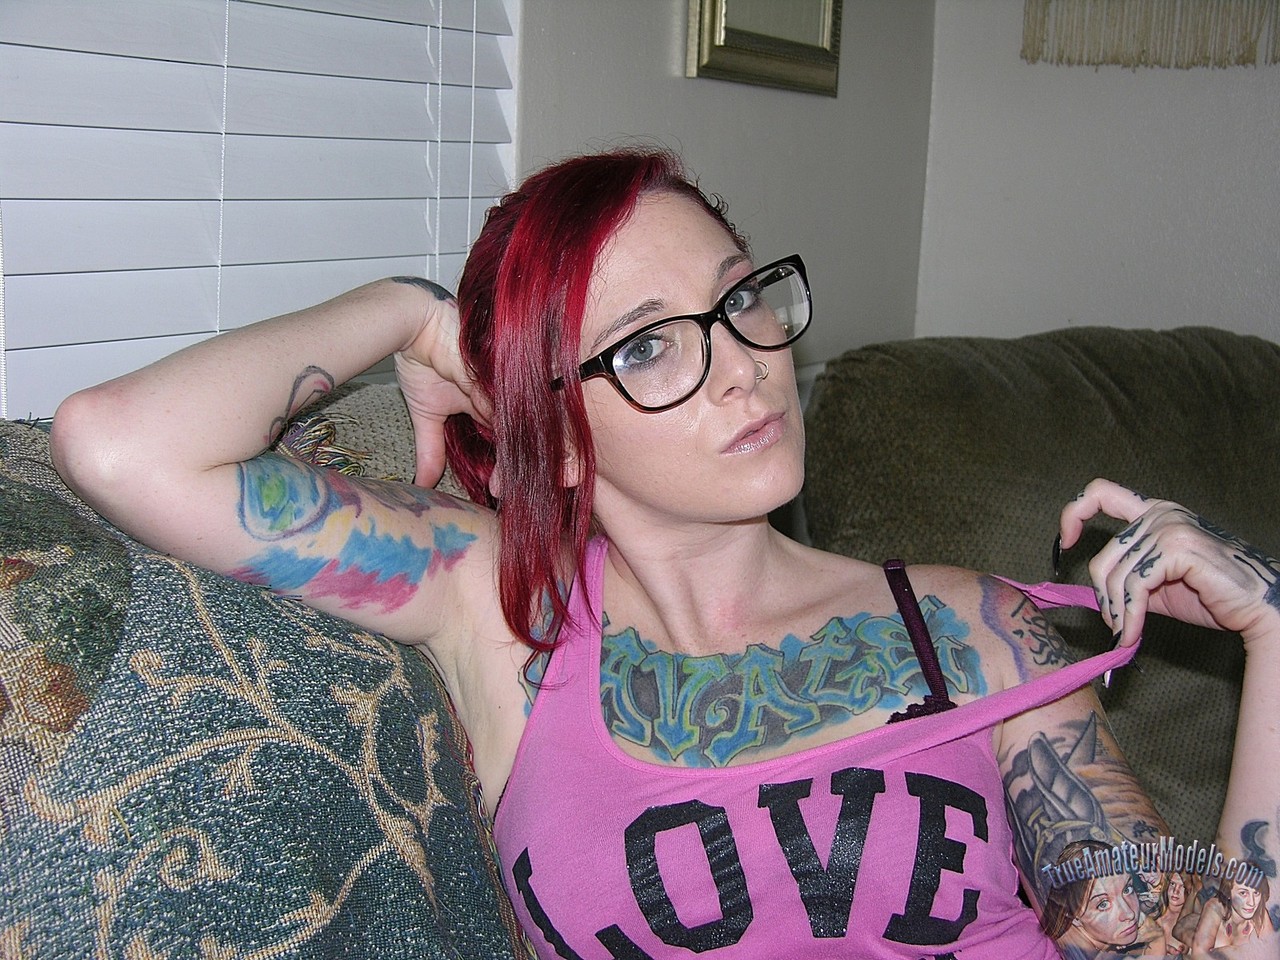 Tattooed redhead Lola takes off her glasses and clothes for her first nudes foto pornográfica #426299010 | True Amateur Models Pics, Lola, Tattoo, pornografia móvel